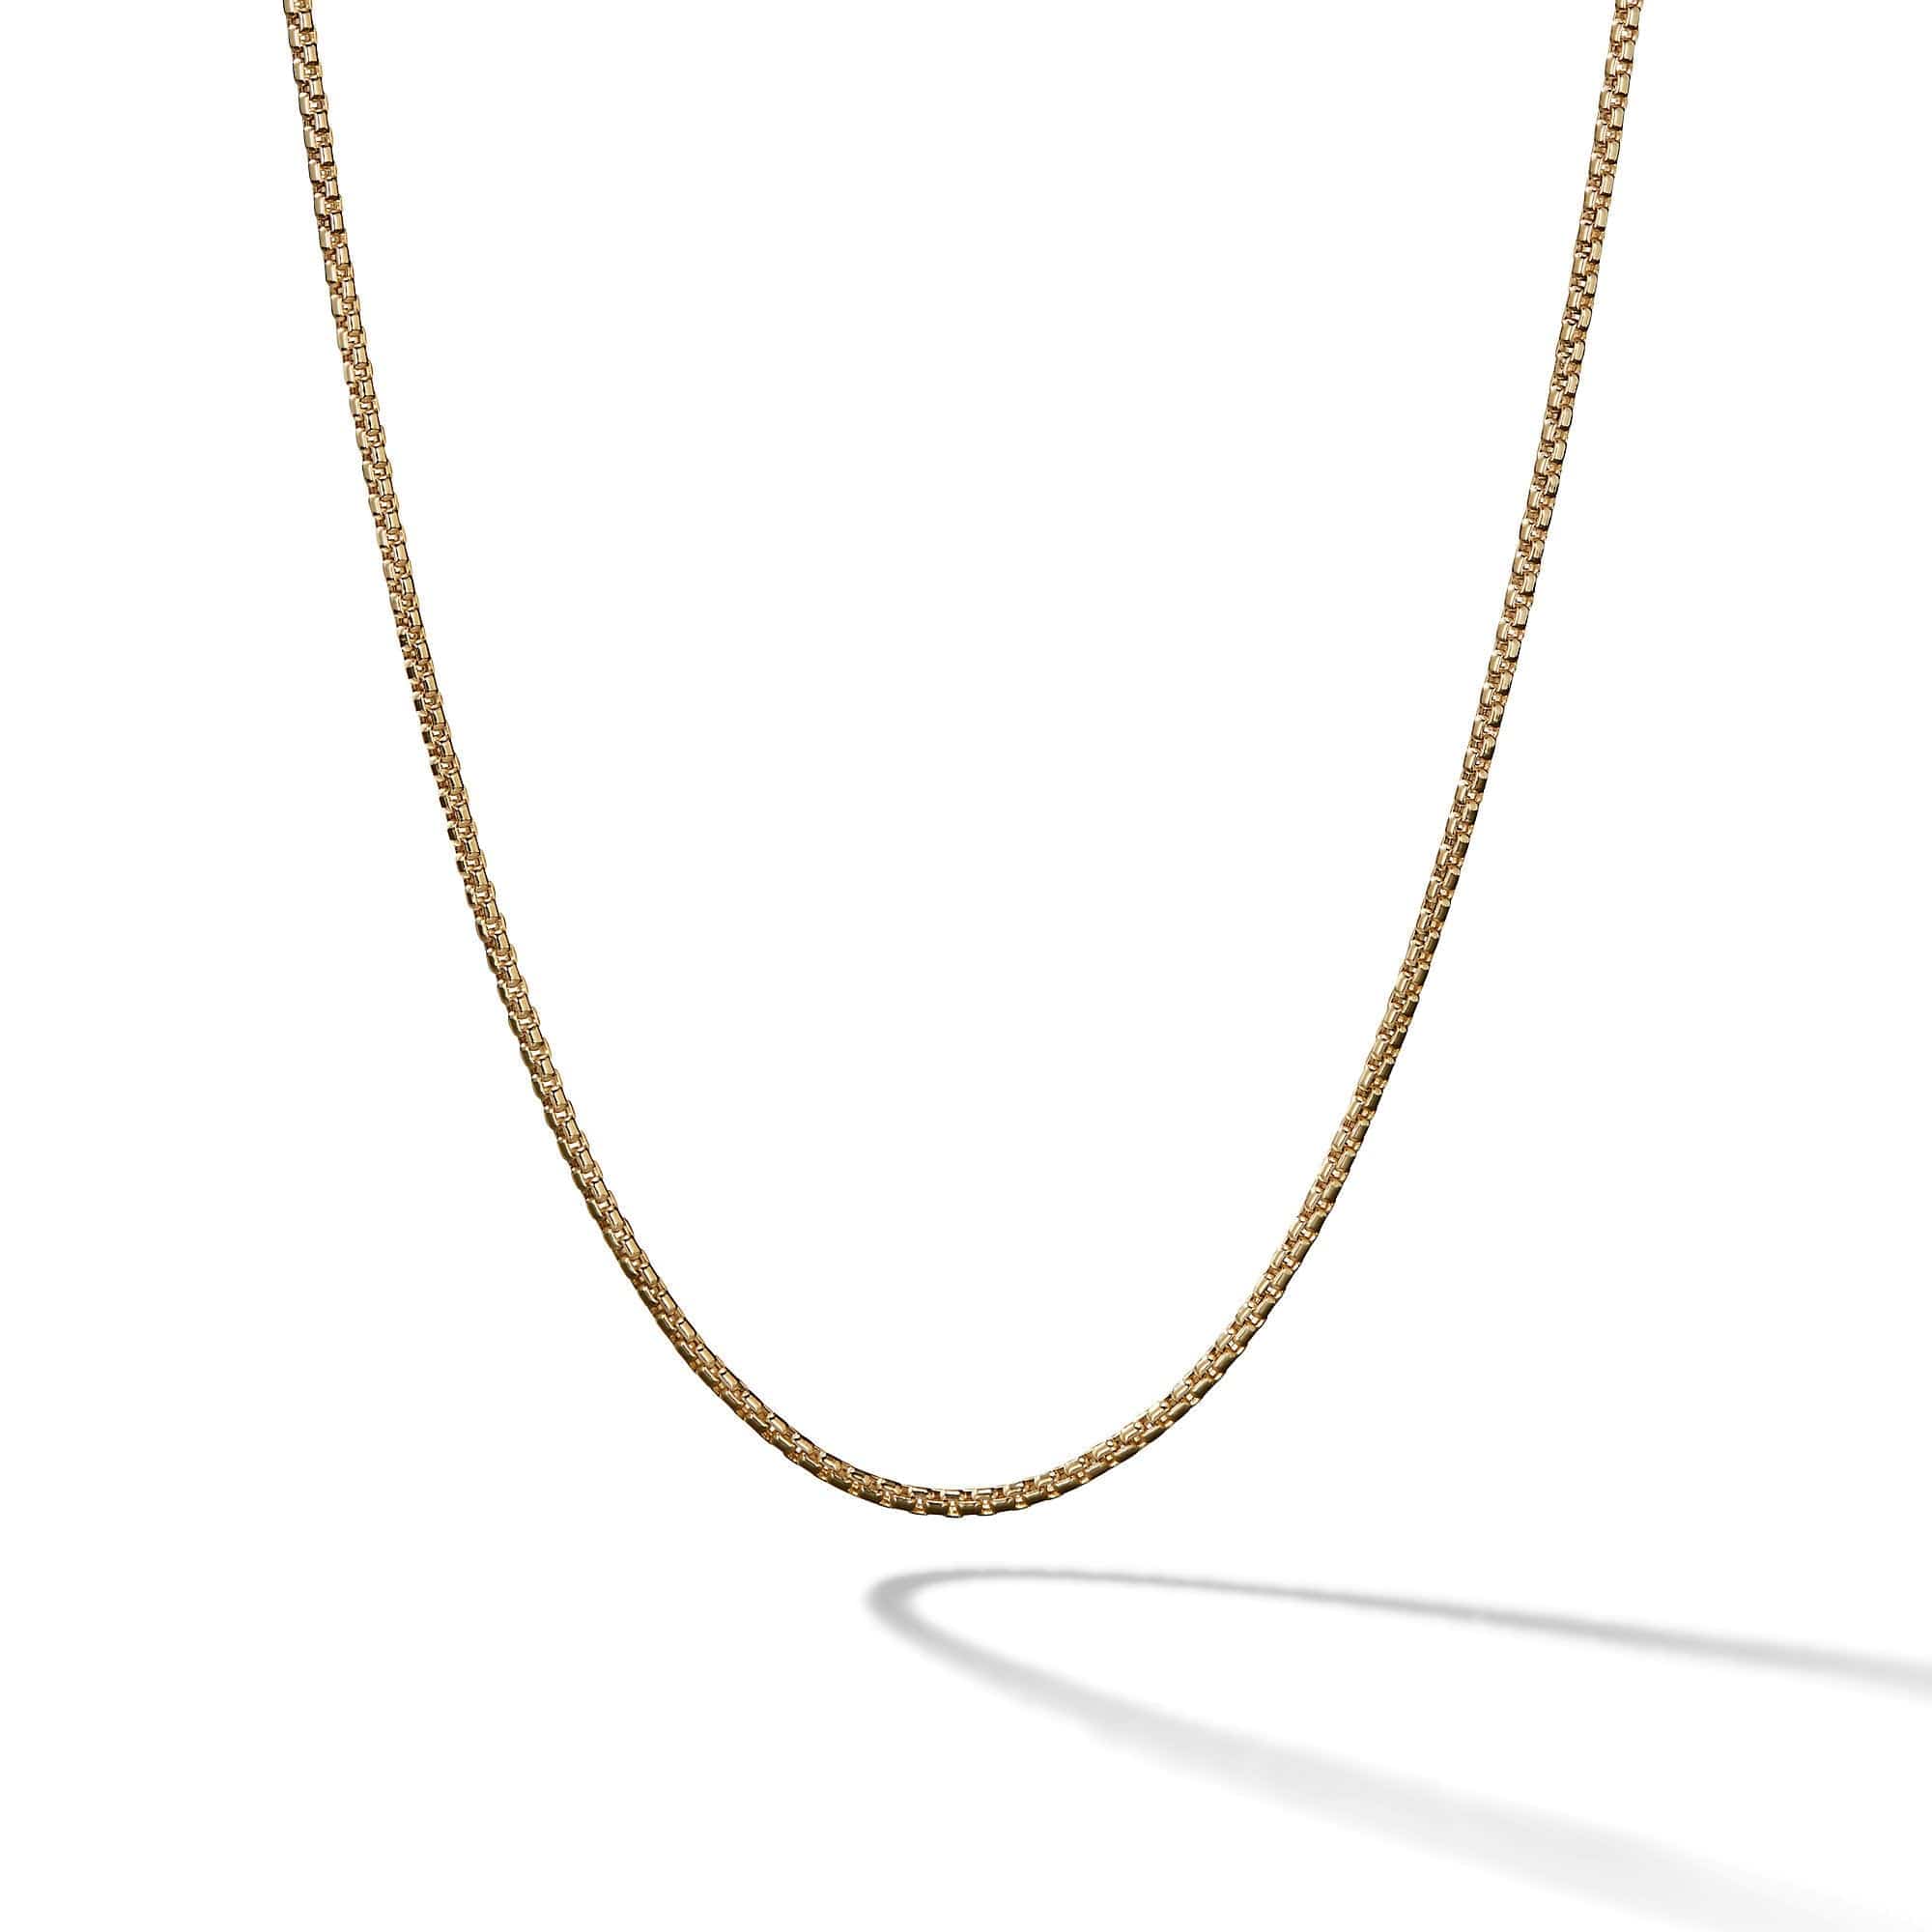 Box Chain Necklace in 18K Gold, 1.7mm, Long's Jewelers